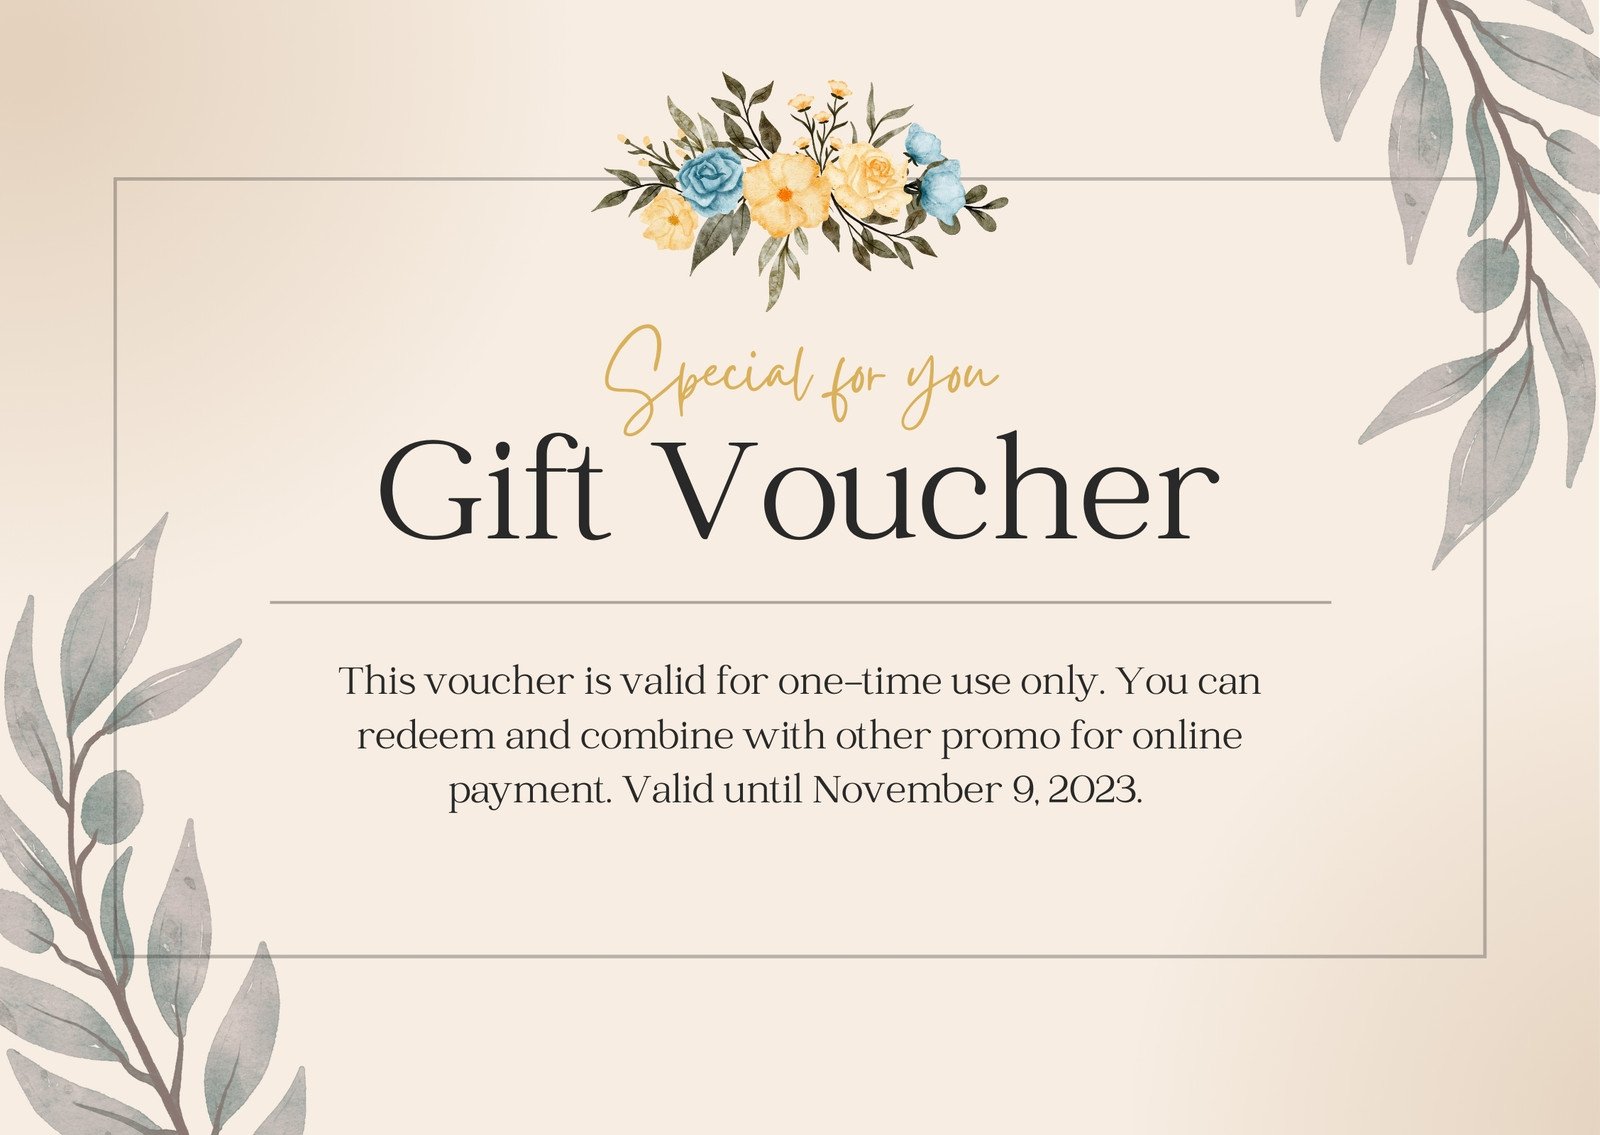 Gift Card Font: A Comprehensive Guide